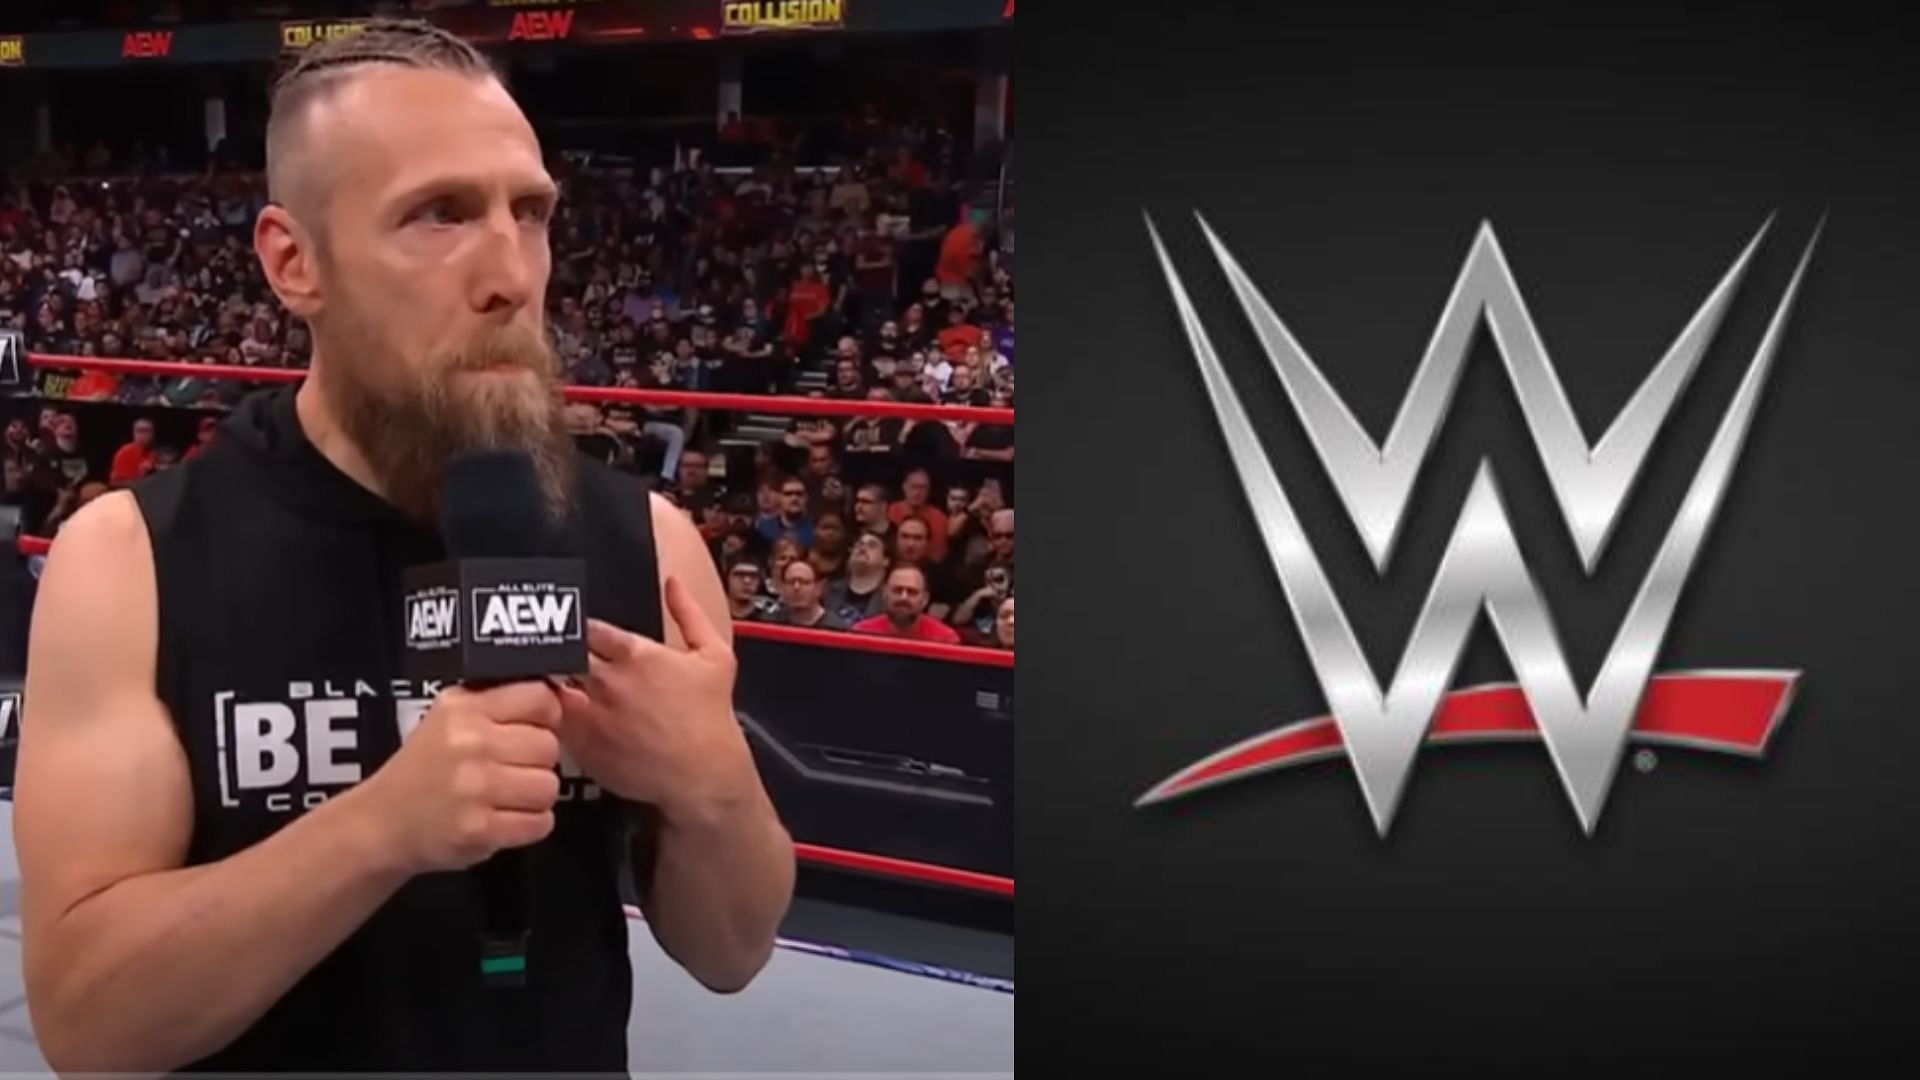 Bryan Danielson signed with AEW in 2021 [Image Credits: AEW